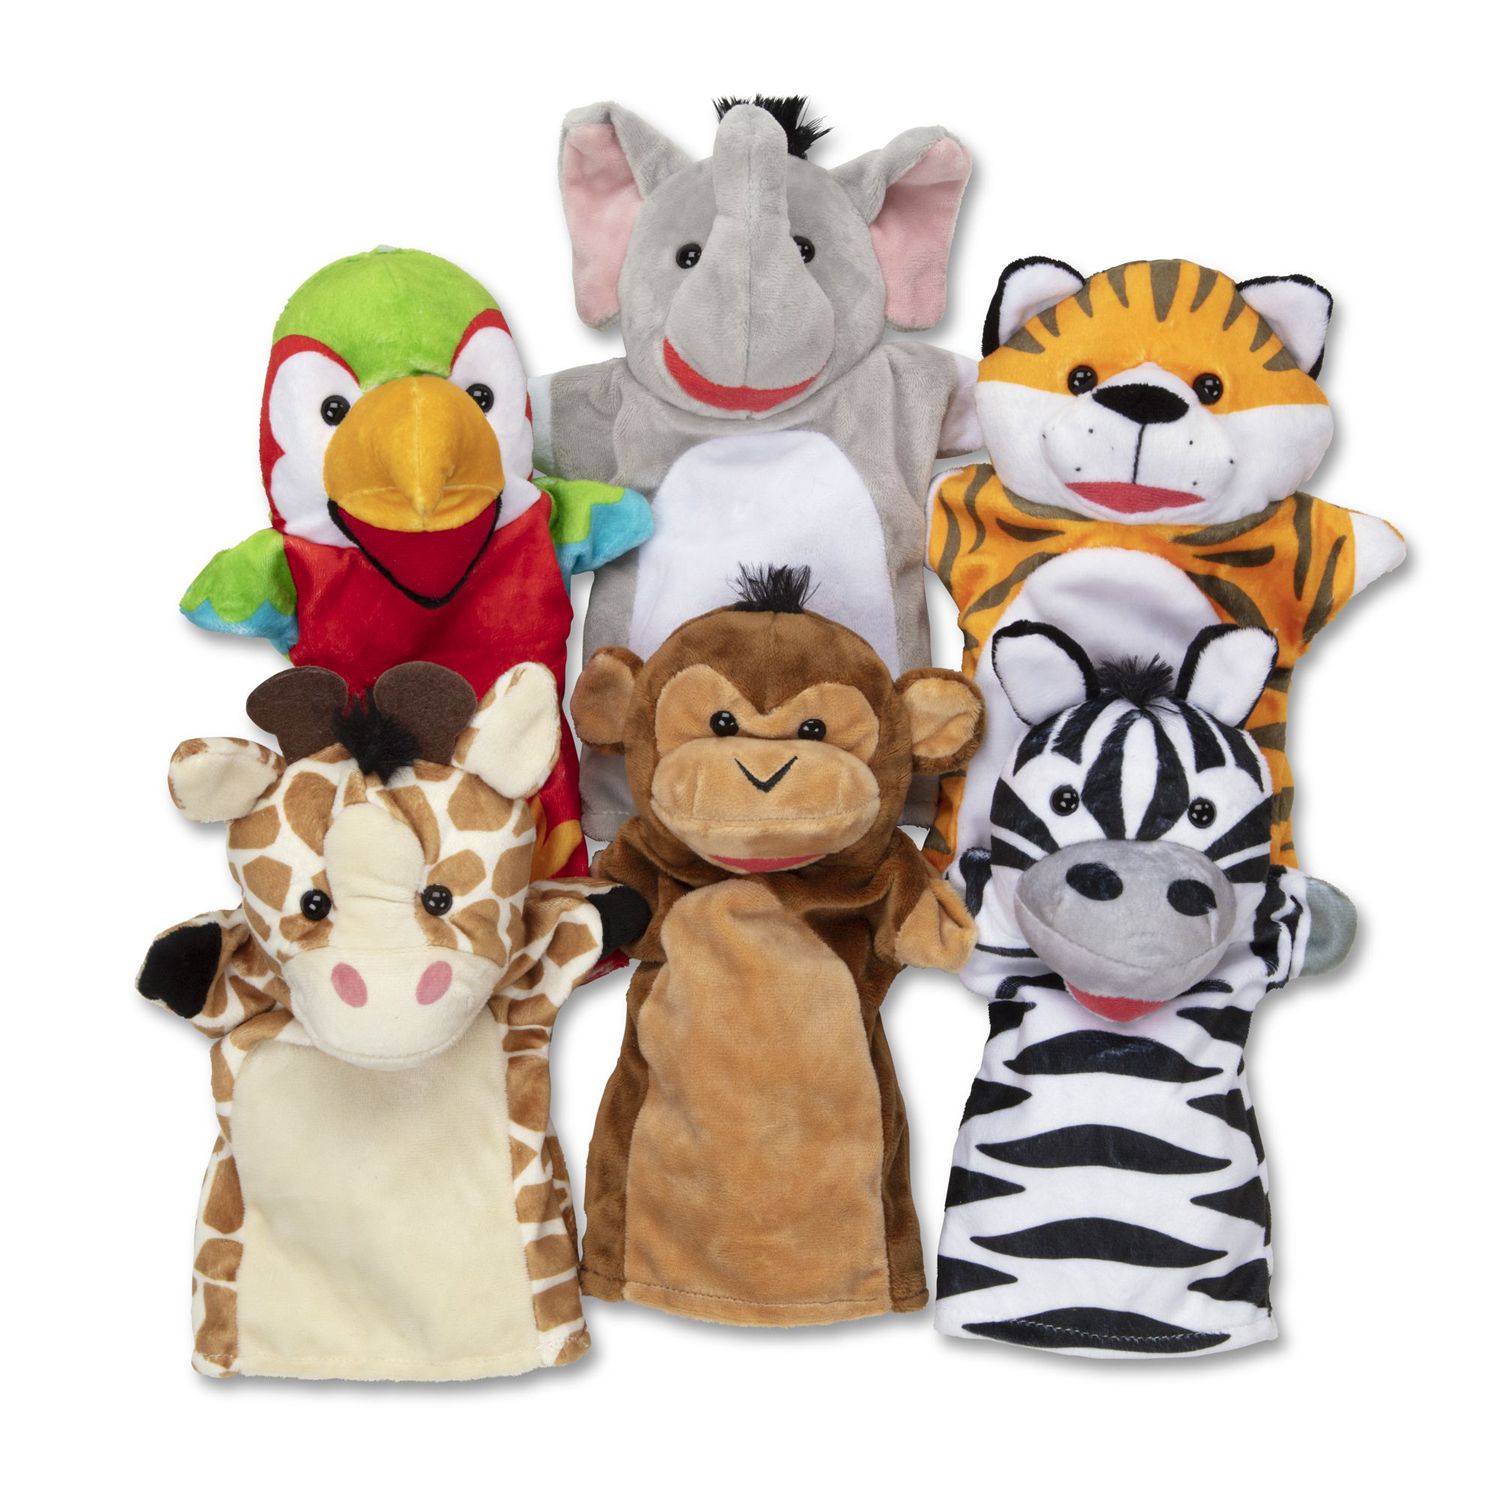 where to buy hand puppets near me